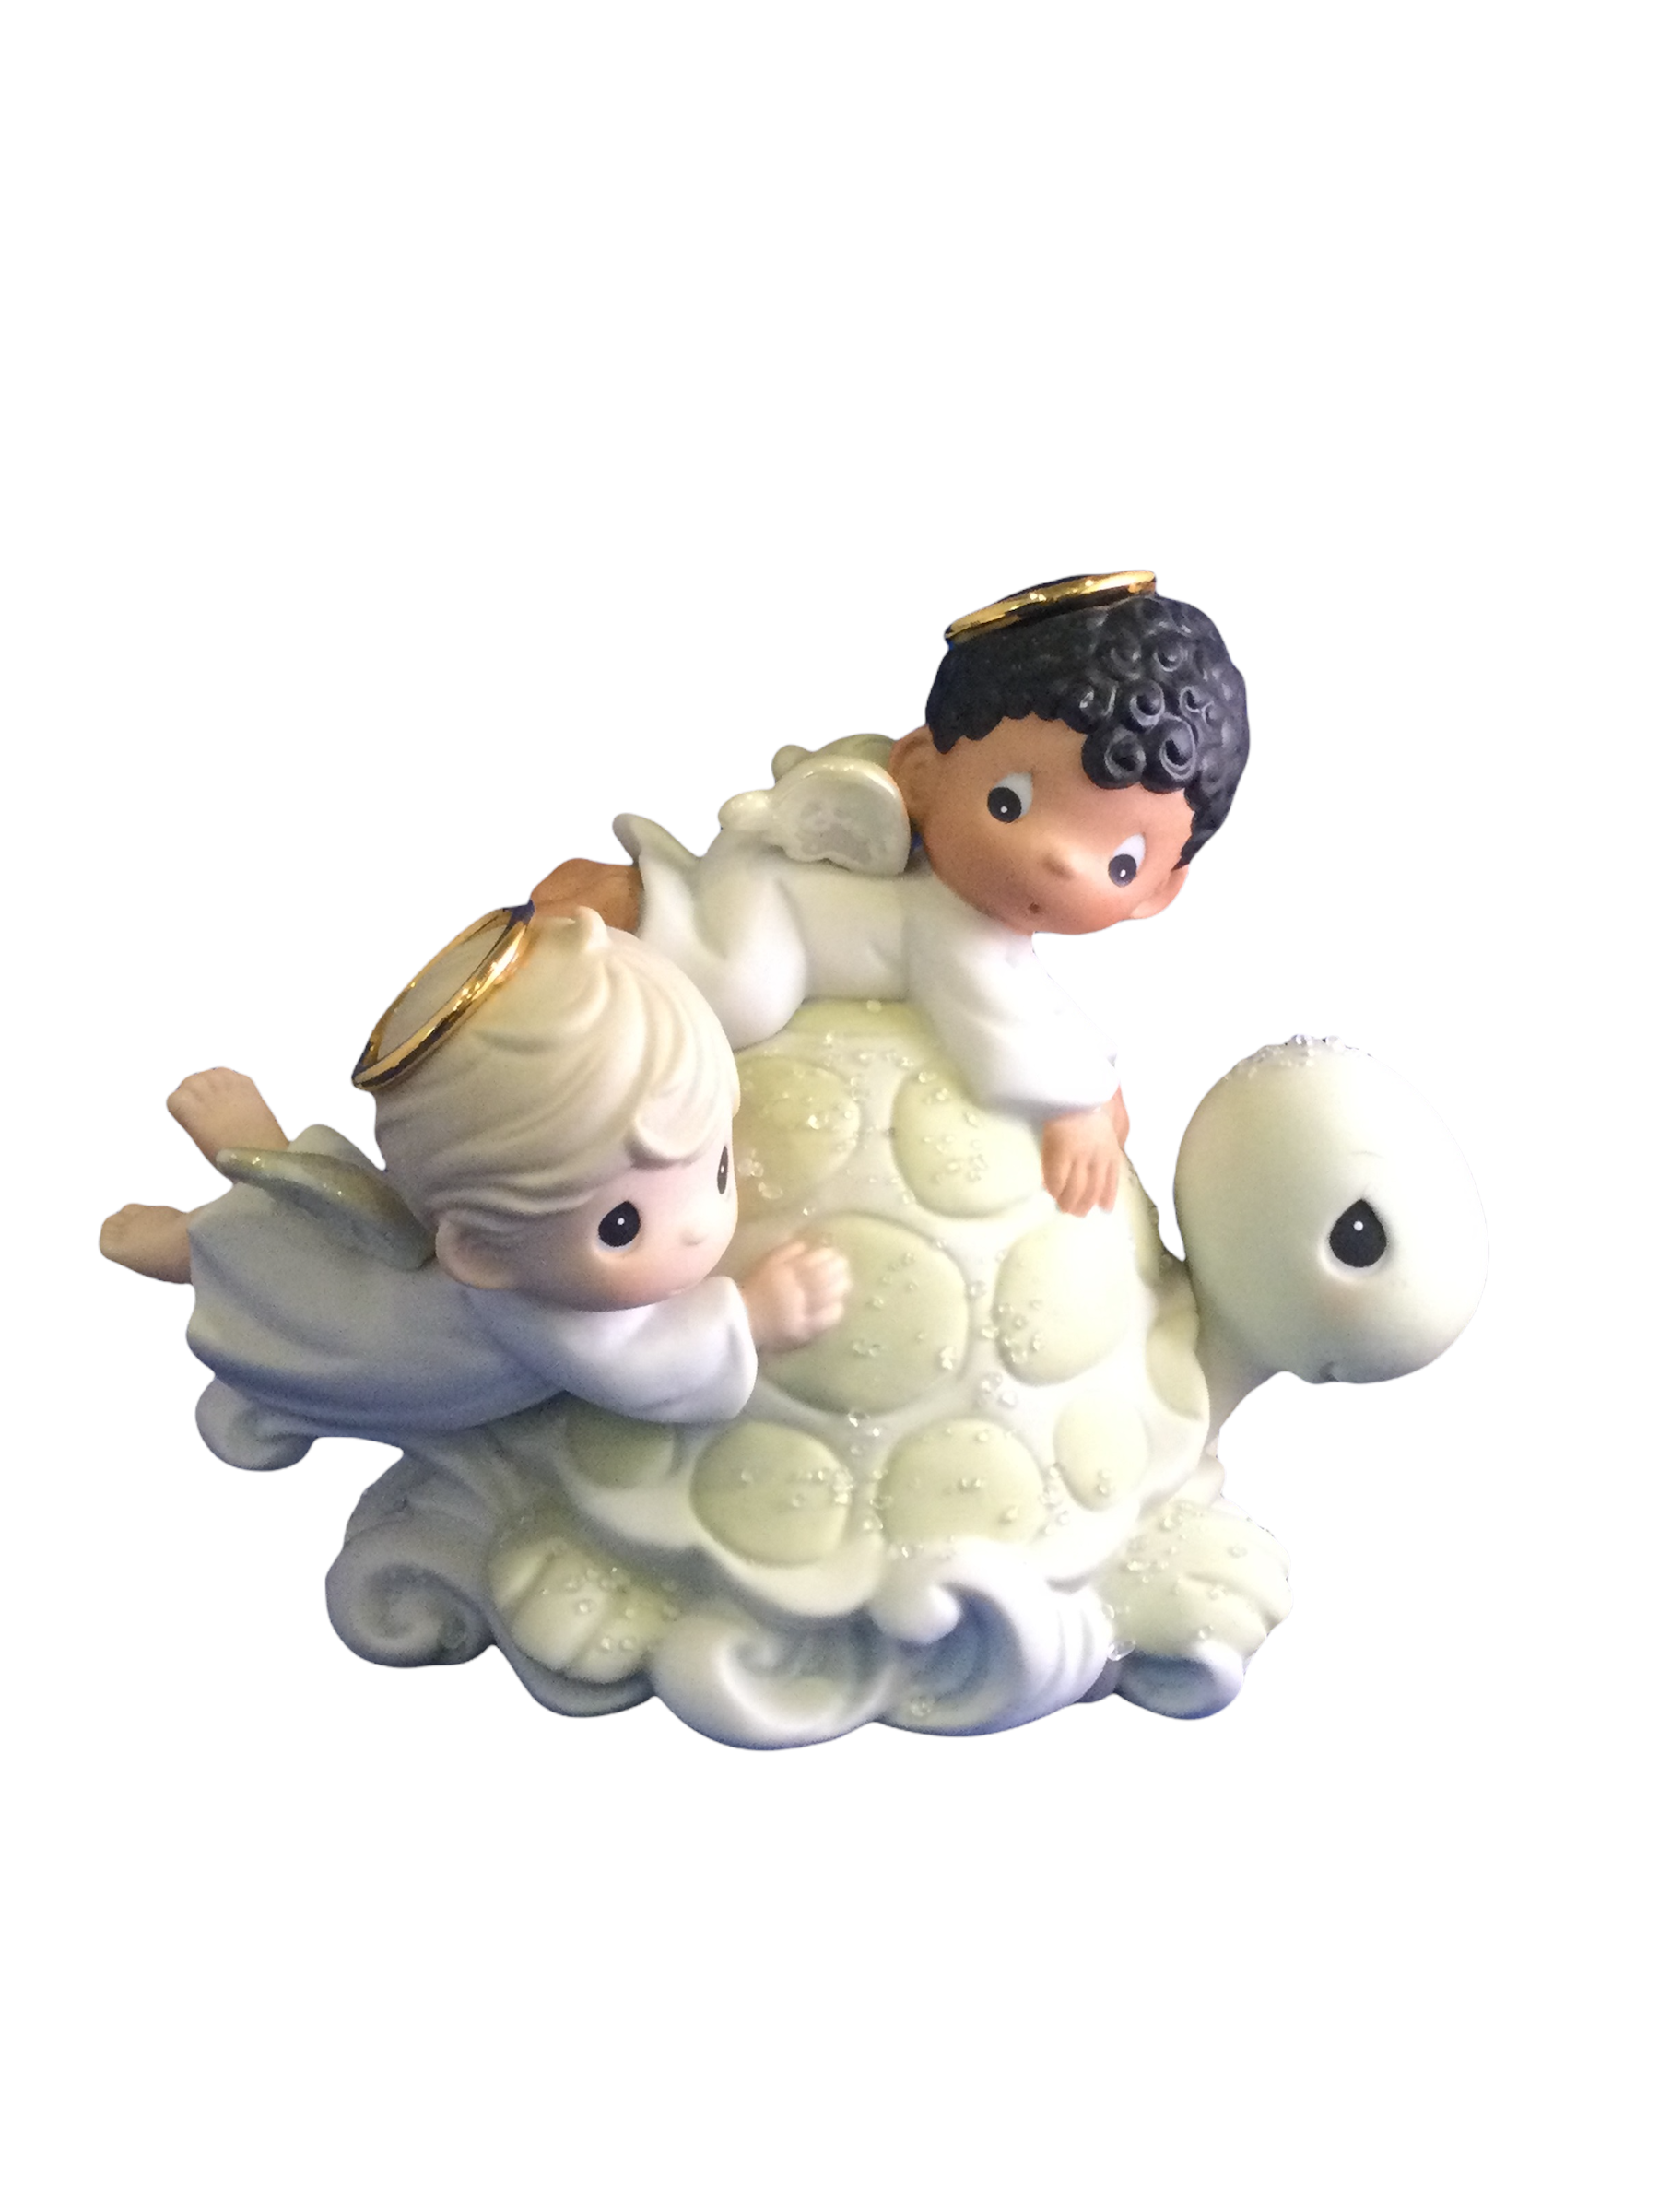 There Shall Be Fountains Of Blessings - Precious Moment Figurine